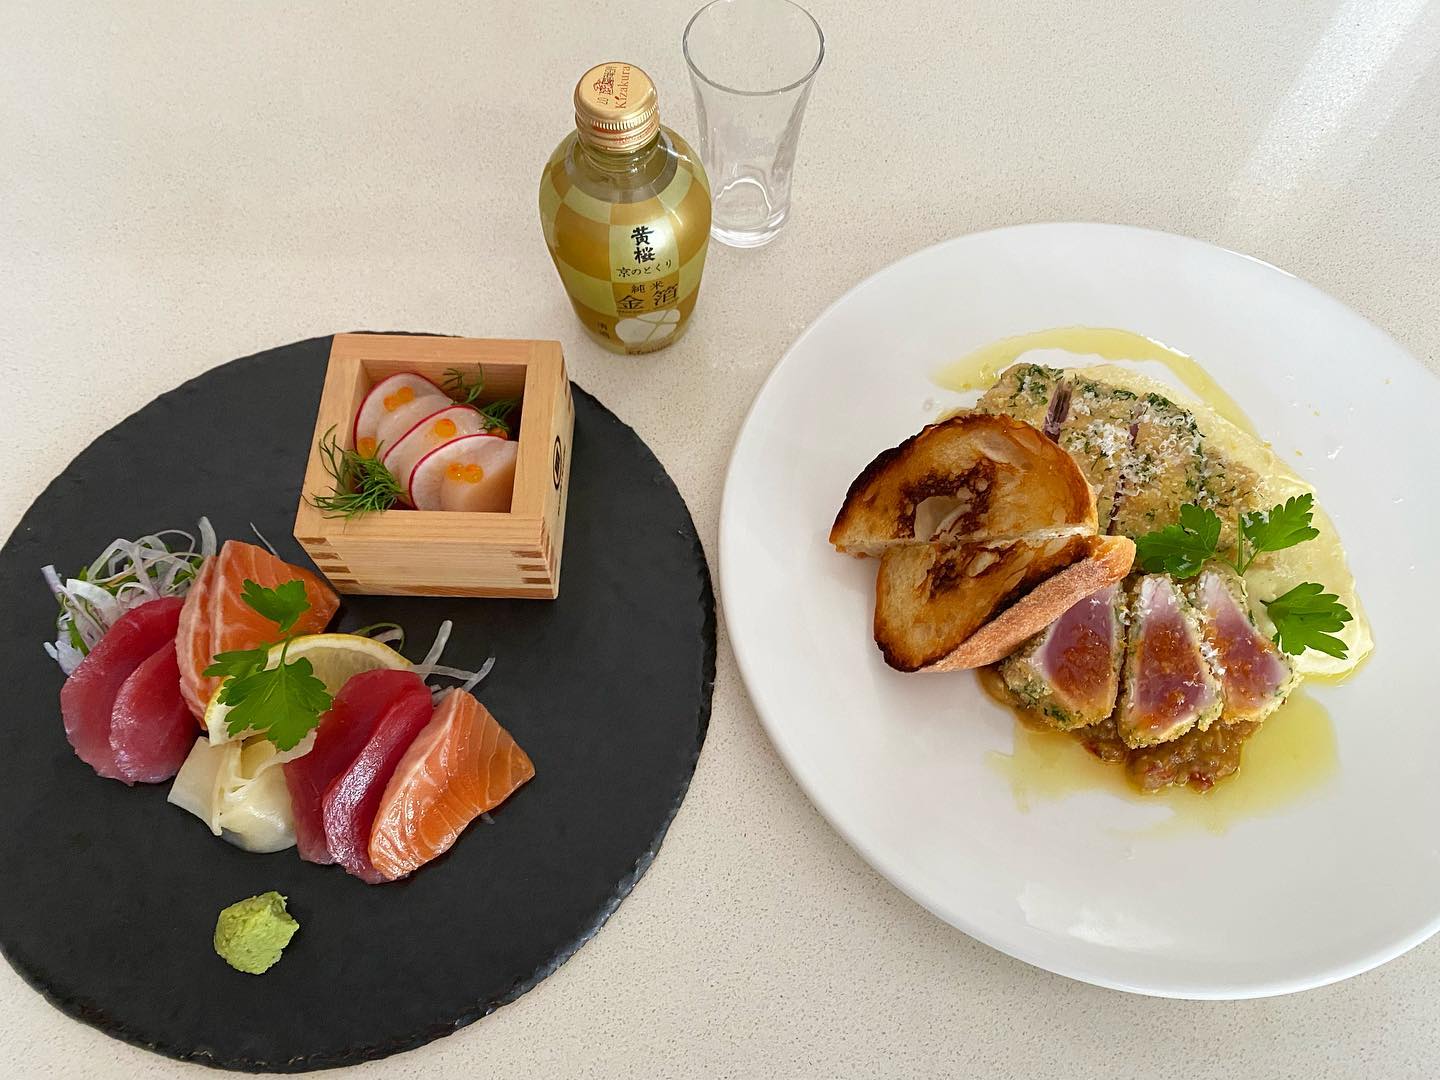 Next our special is yellowfin tuna! Assorted sashimi also Tuna parmigiana  with eggplant wasabi tapenade and tofu 
mashed potato.
Which do you prefer?